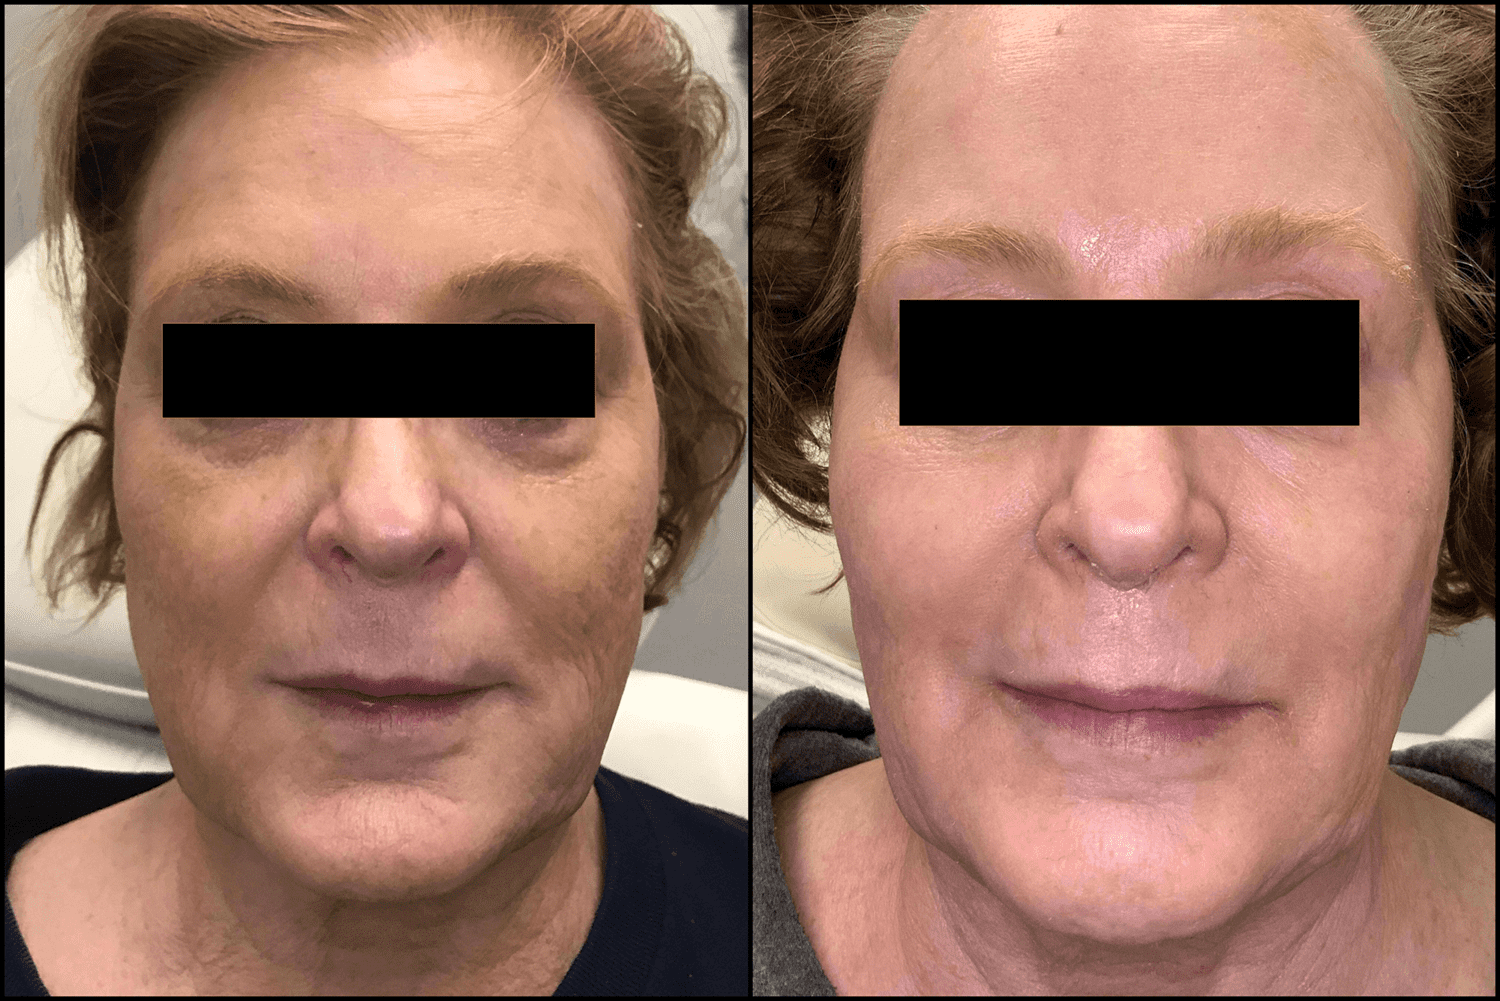 Aerolase Neo Elite Rejuvenation before and after results from the front